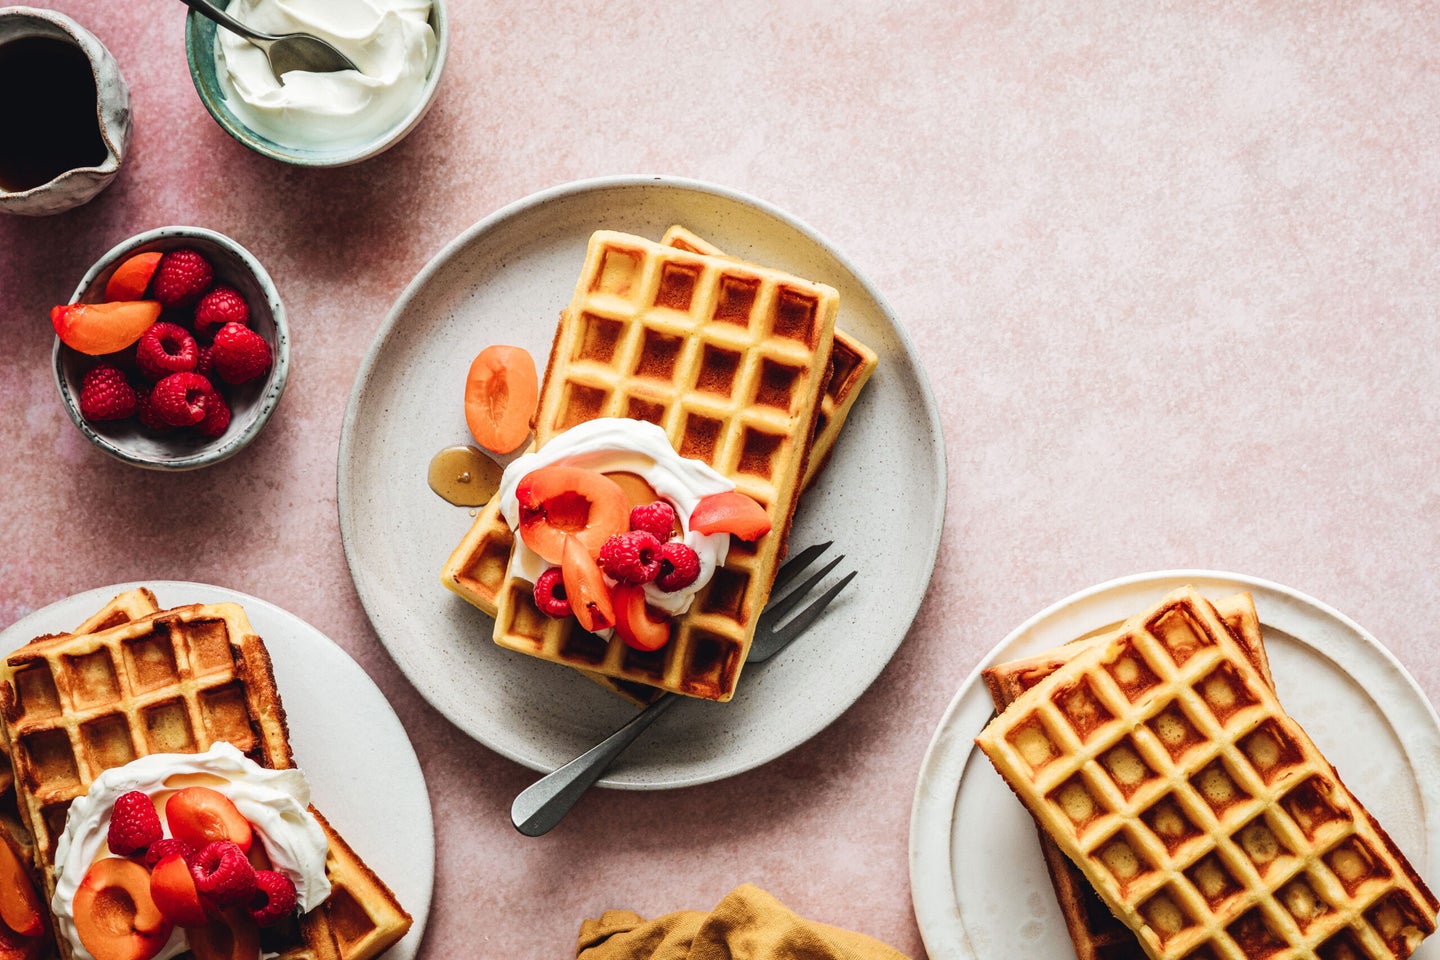 Best Waffle Makers